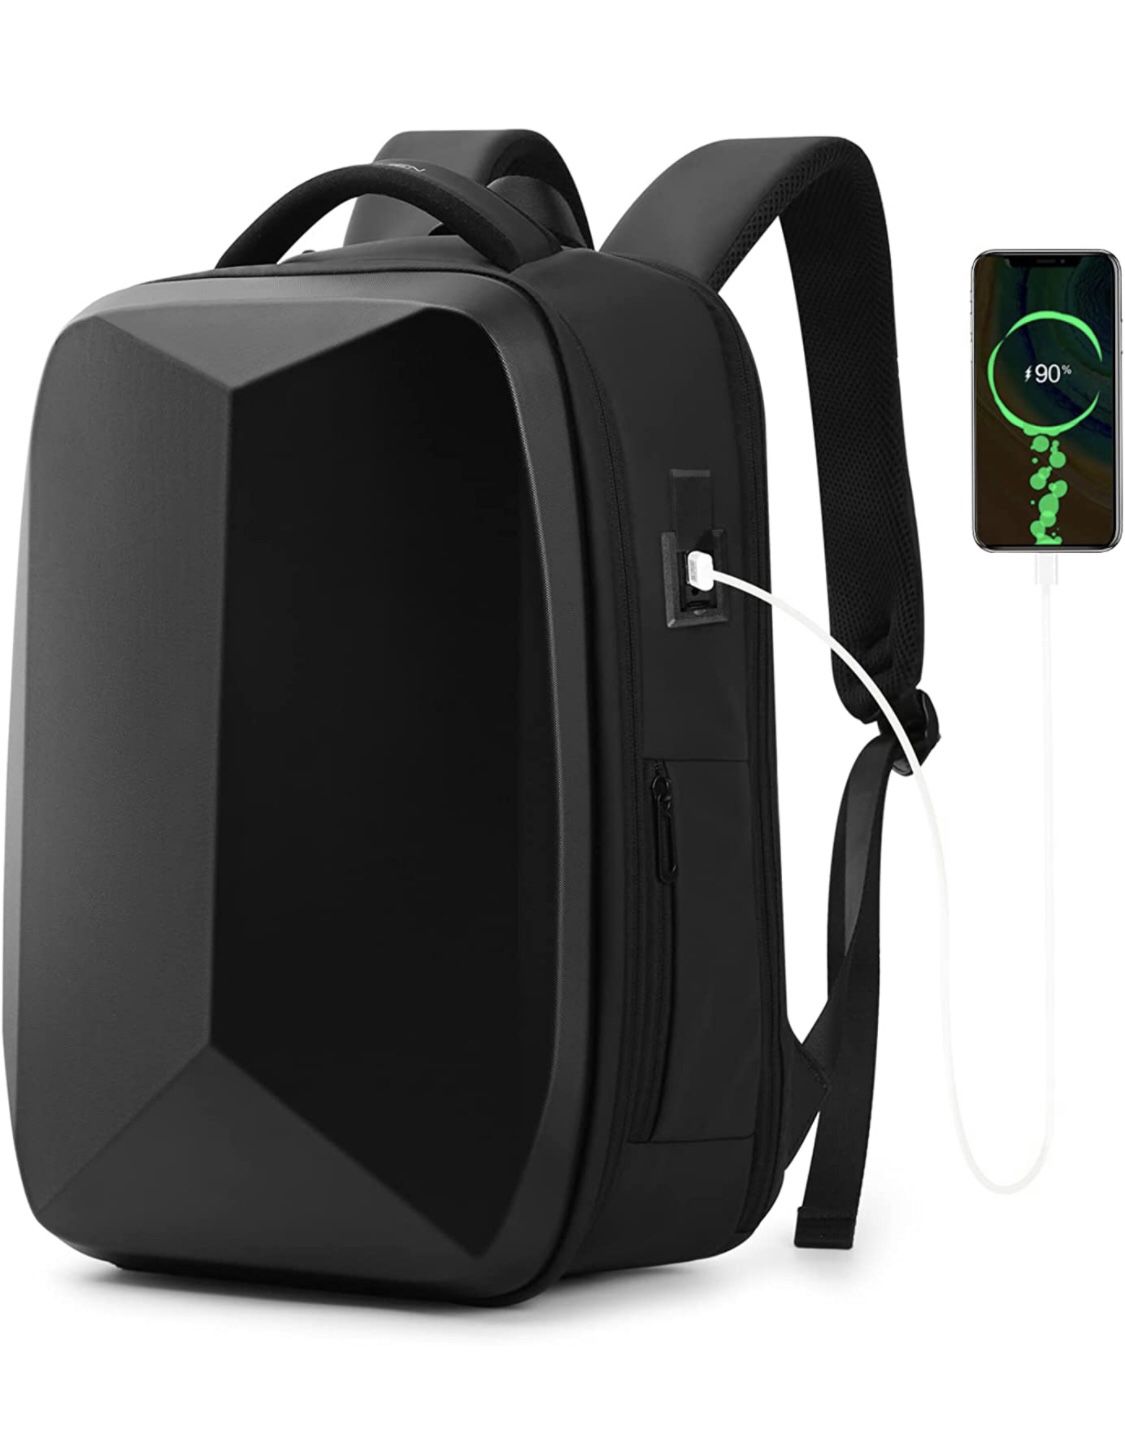 Brand NEW Hard Shell Laptop Backpack for Men, Anti-Theft Gaming Backpack 15.6" Laptop and Notebook Double Compartment, Waterproof 